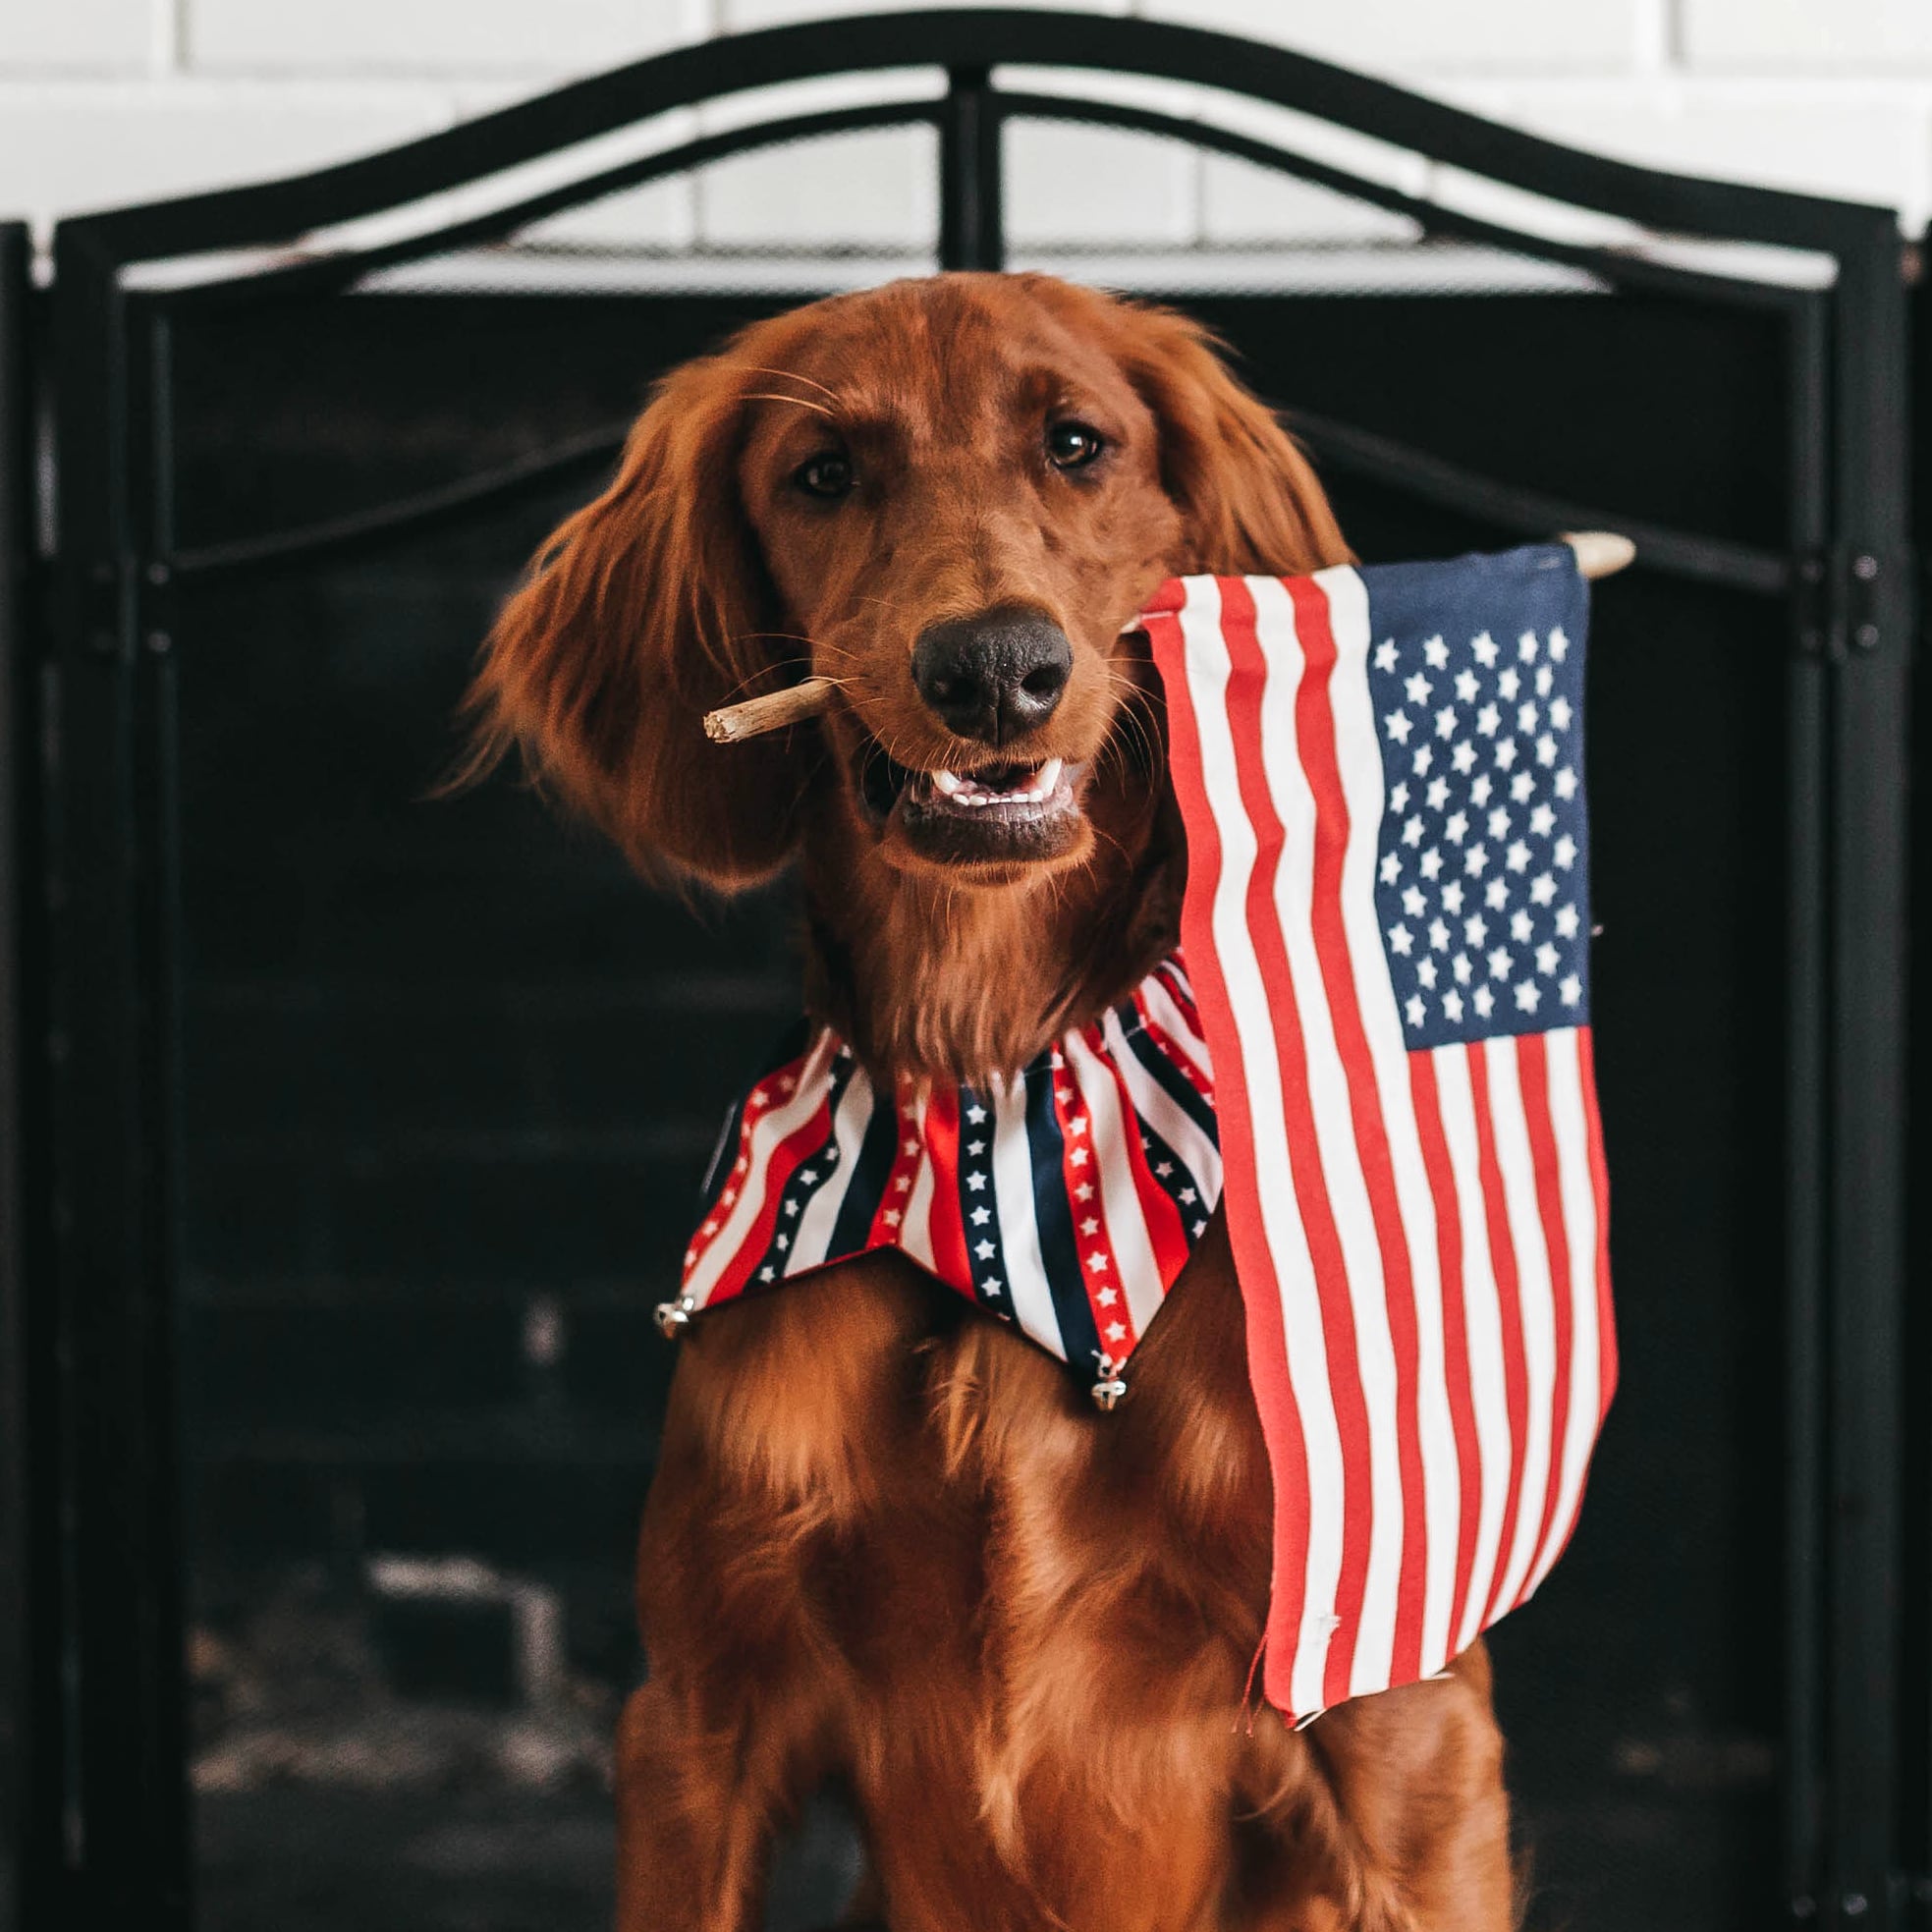 7 Tips to Keep Your Dog Safe on the 4th of July